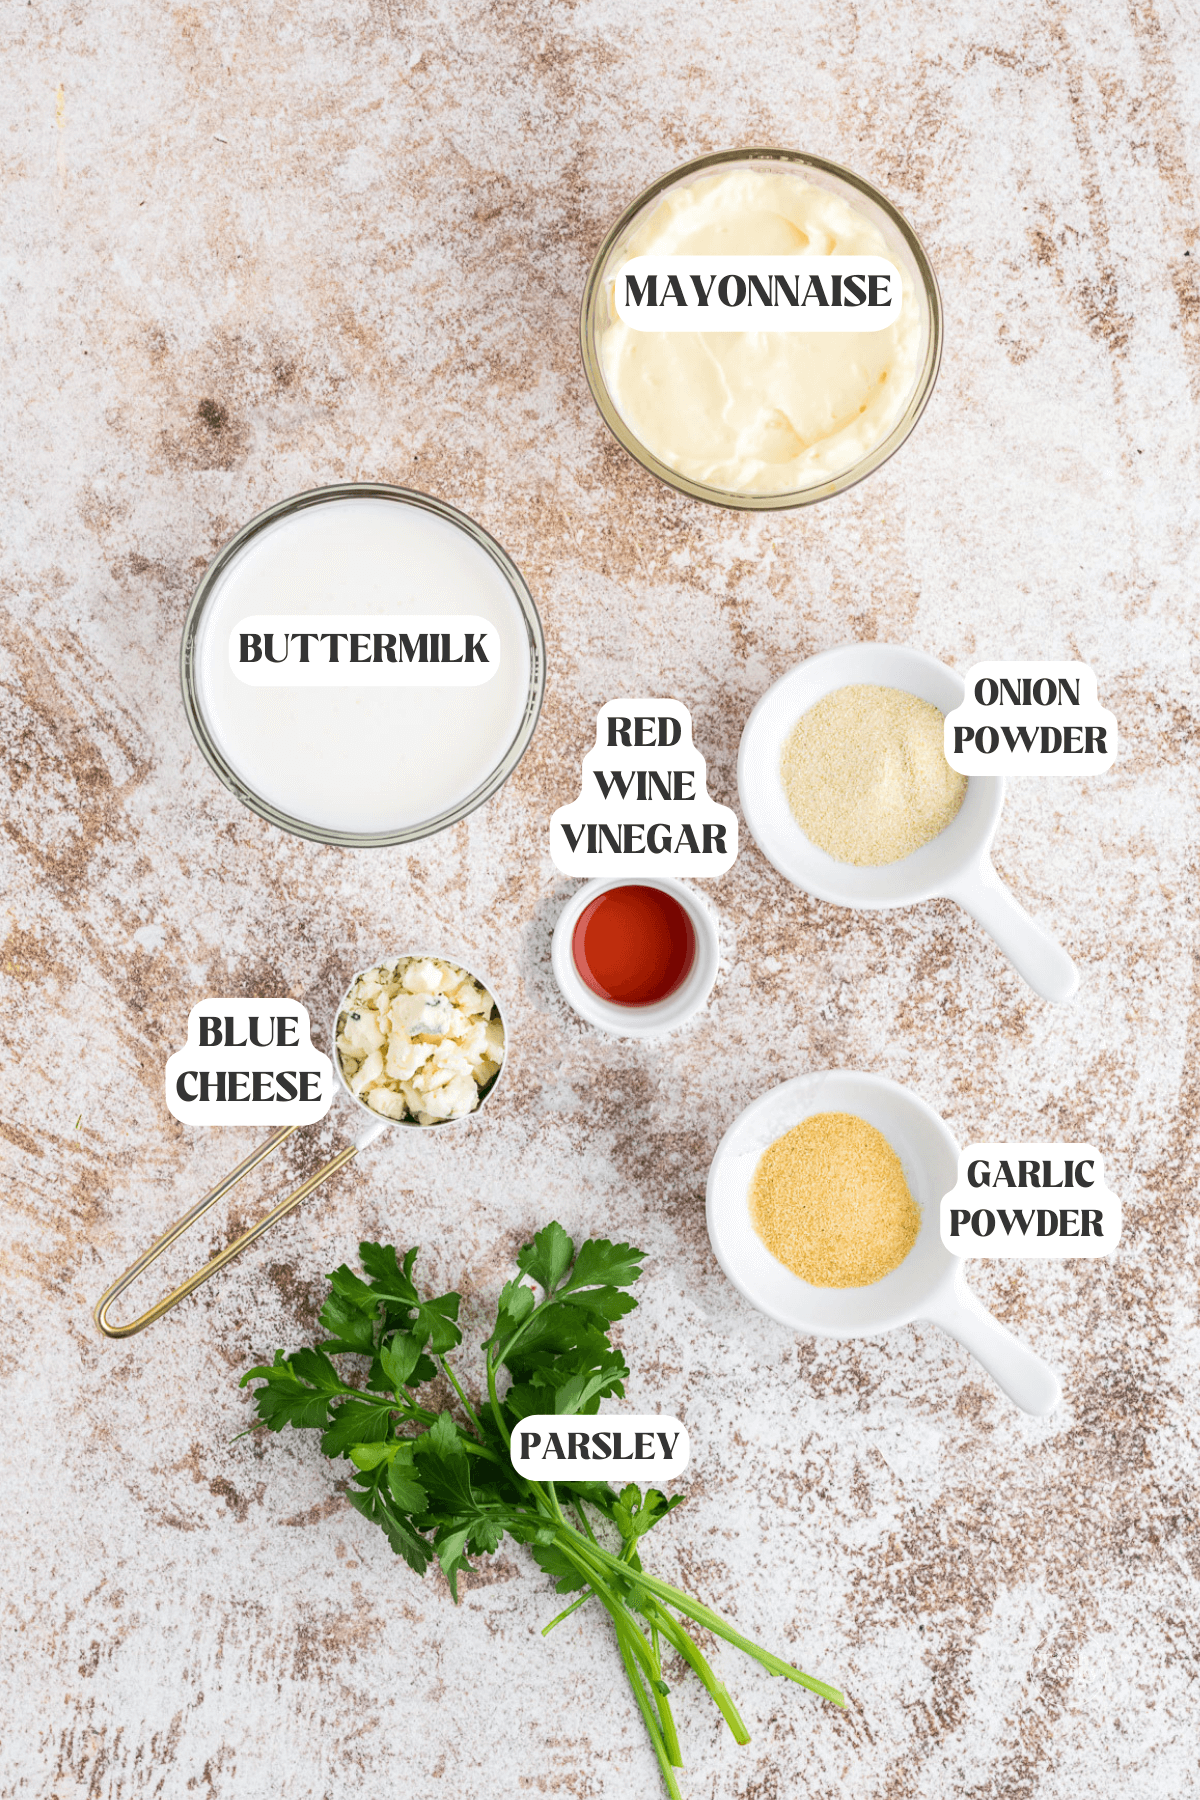 Labeled ingredients for blue cheese dressing recipe.